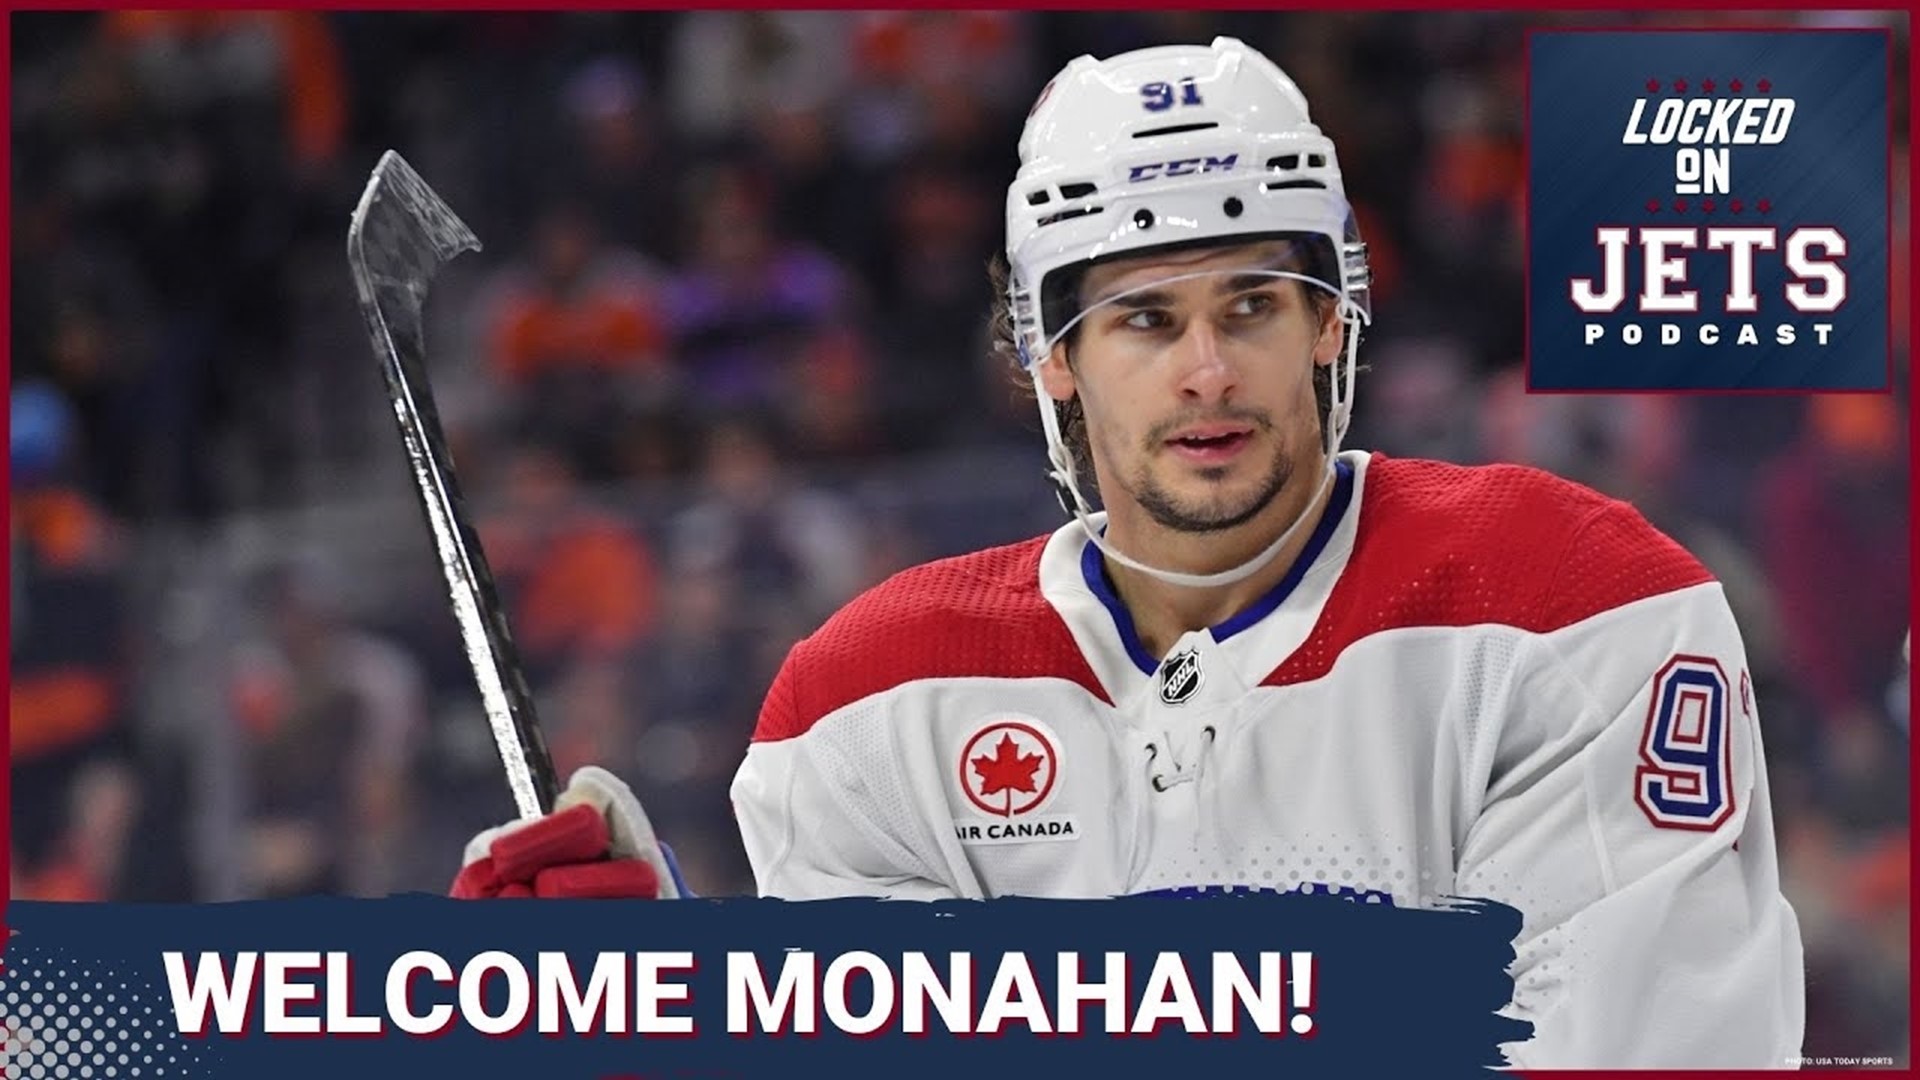 On tonight's episode, we dive into the details and implications of Sean Monahan to the Winnipeg Jets! What did the Jets send the other way to the Montreal Canadiens?